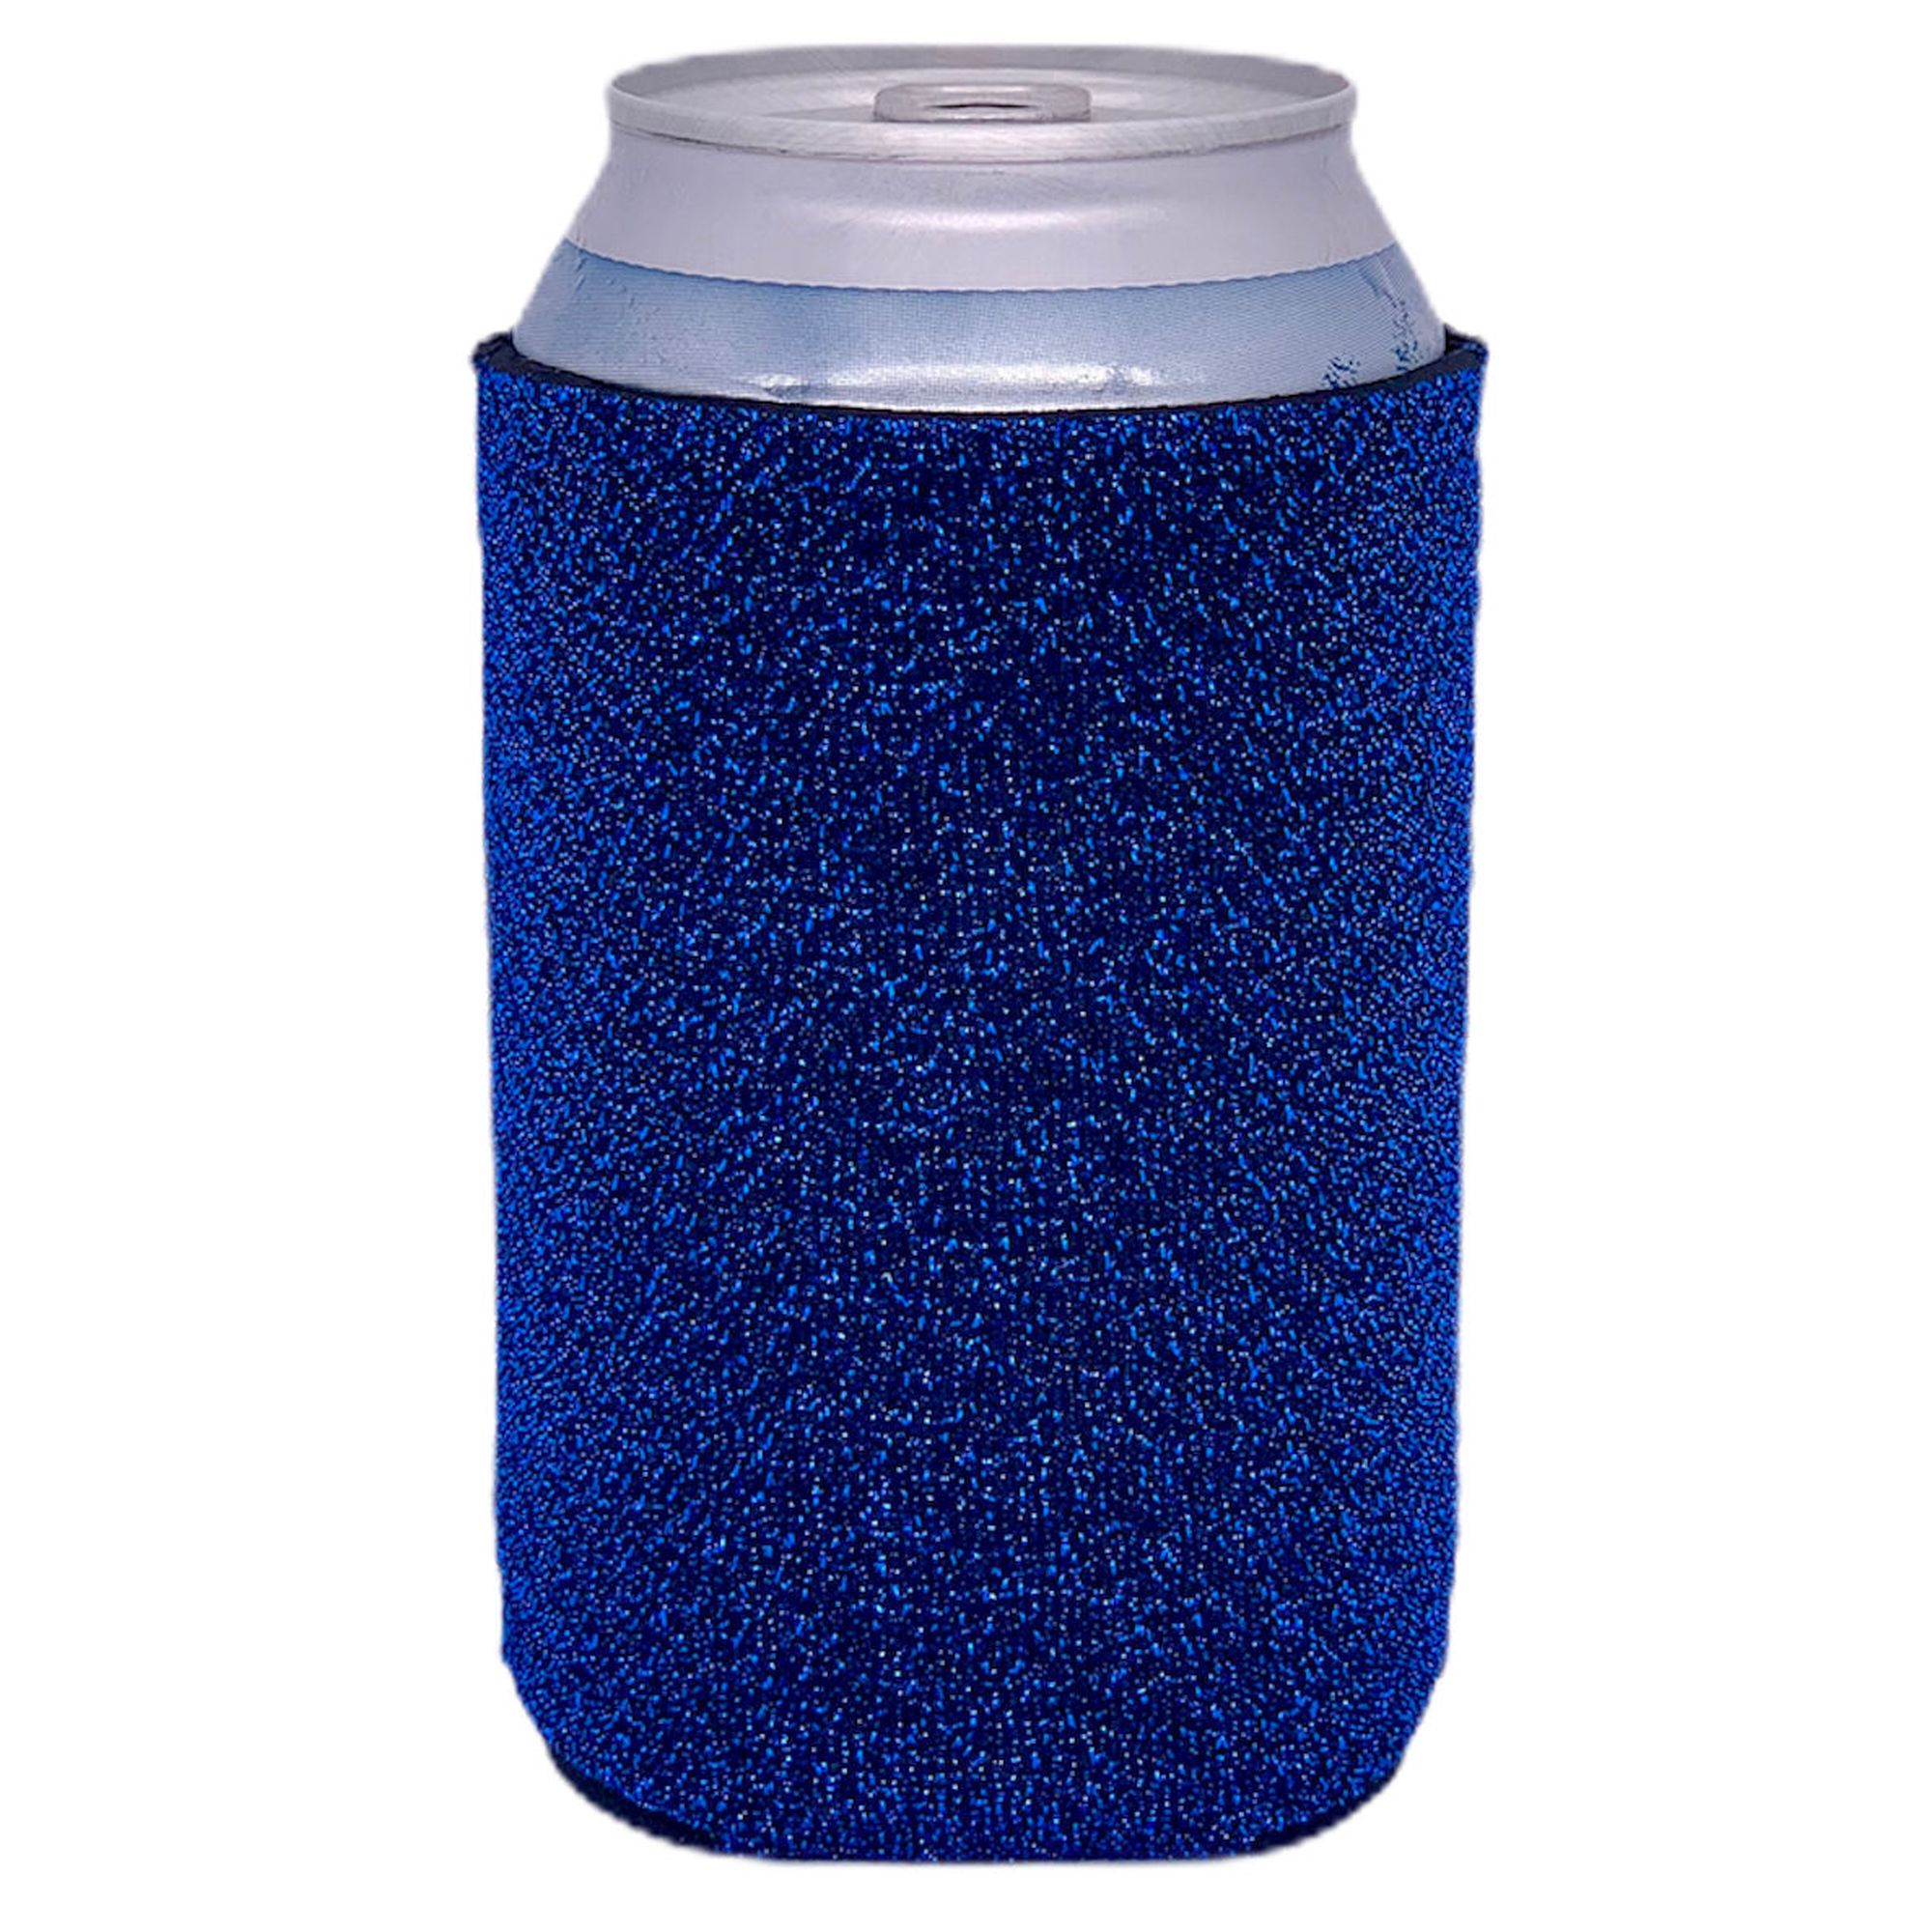 Metallic Shimmer Can-tastic Neoprene Can Coolie. Choice of Colors